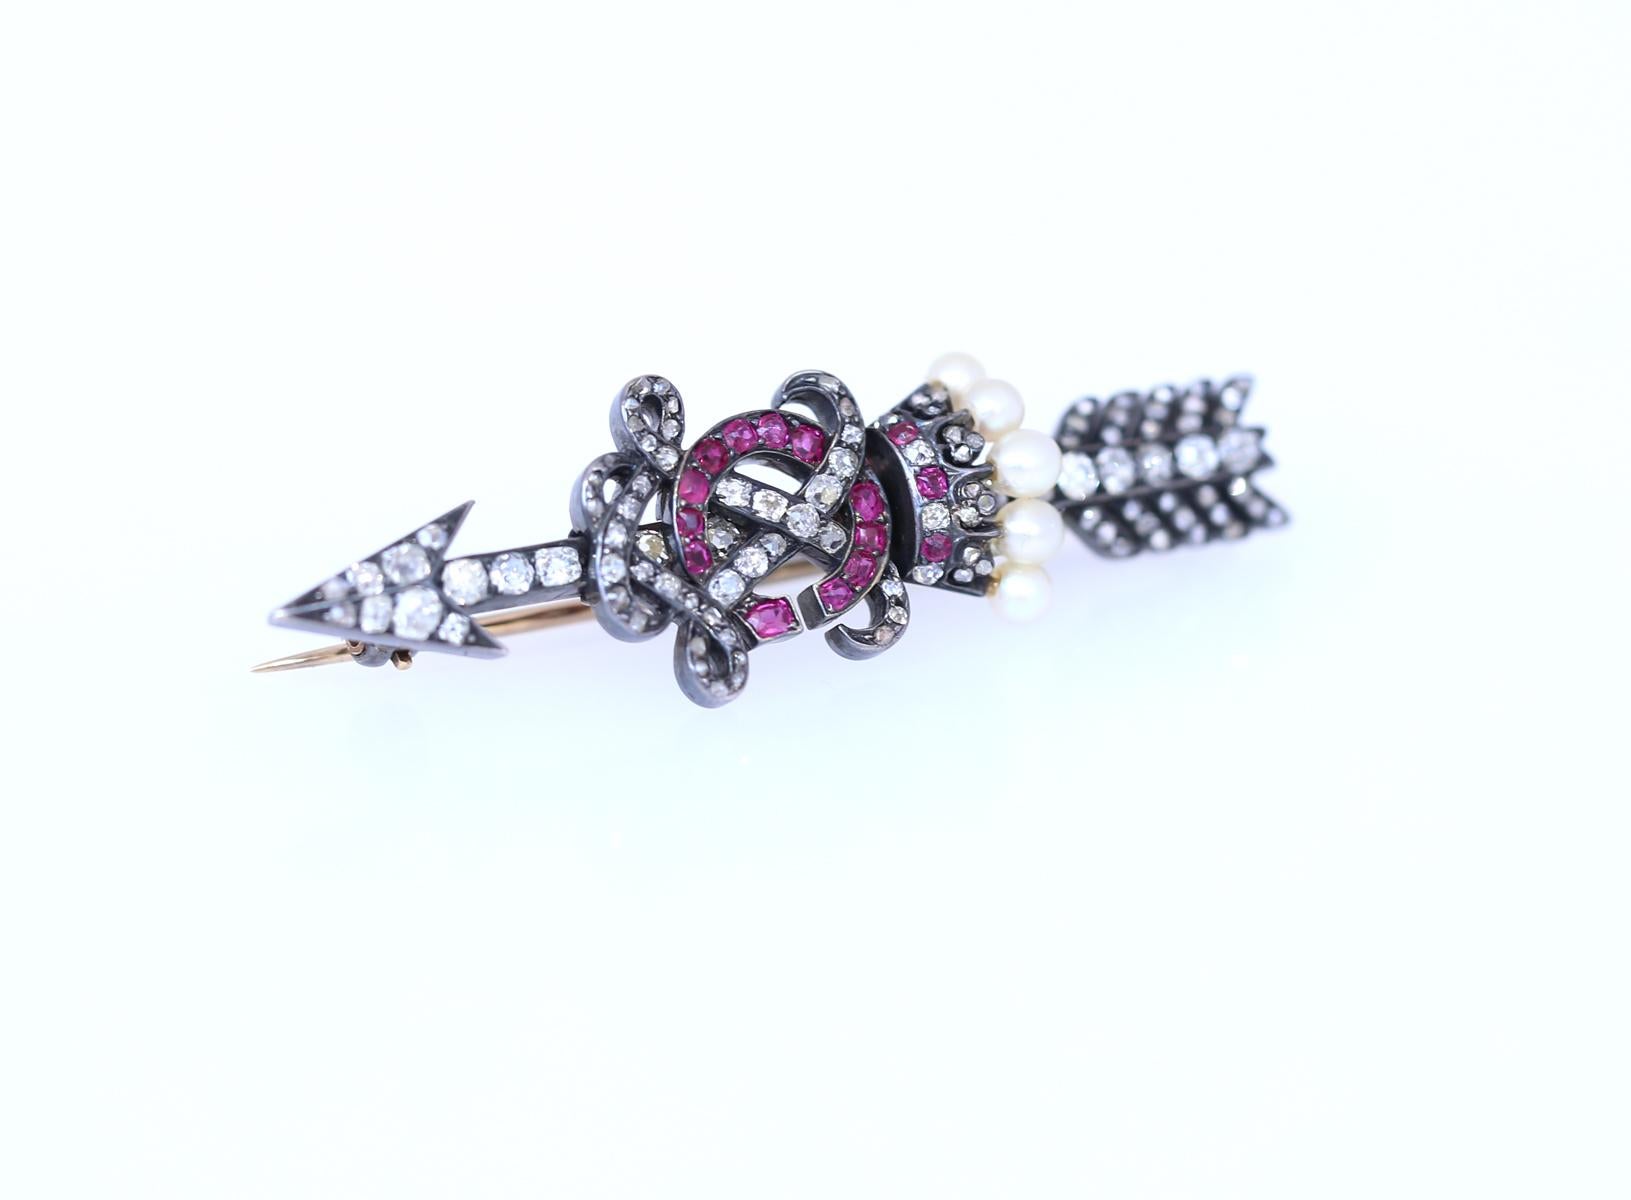 Victorian Brooch Arrow Crown Rubies Diamonds Pearls Gold Letters C X, 1900 For Sale 1